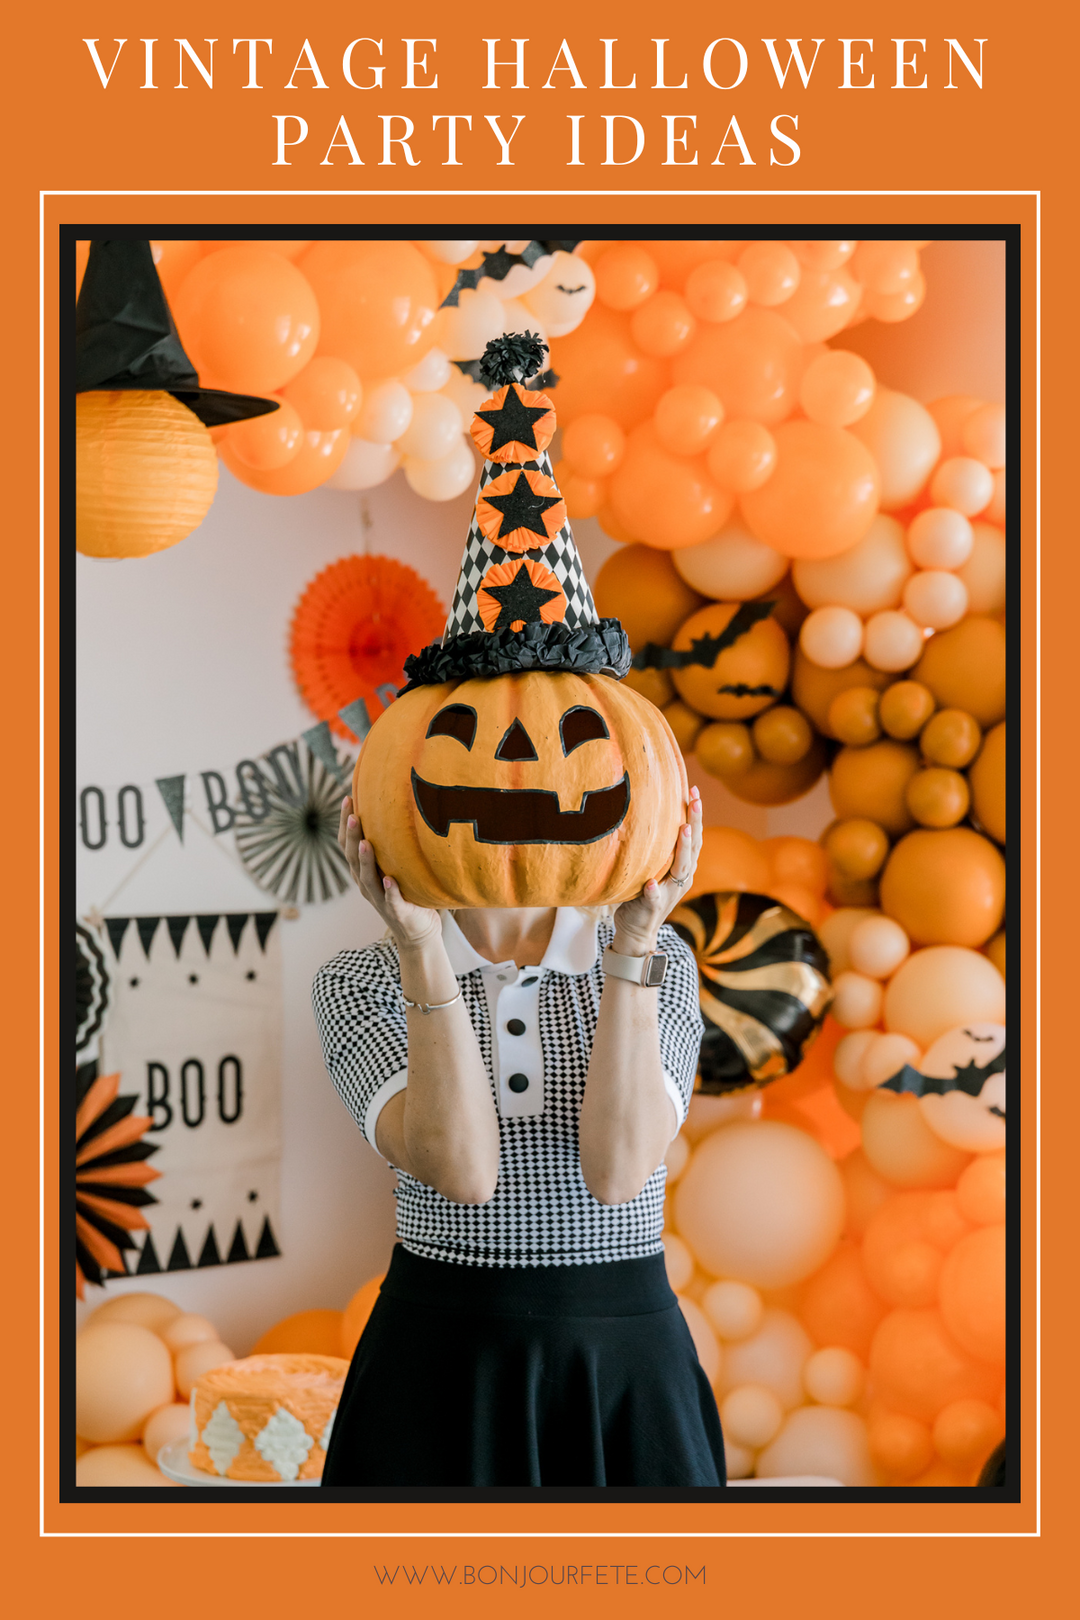 VINTAGE HALLOWEEN DECORATIONS AND PARTY IDEAS